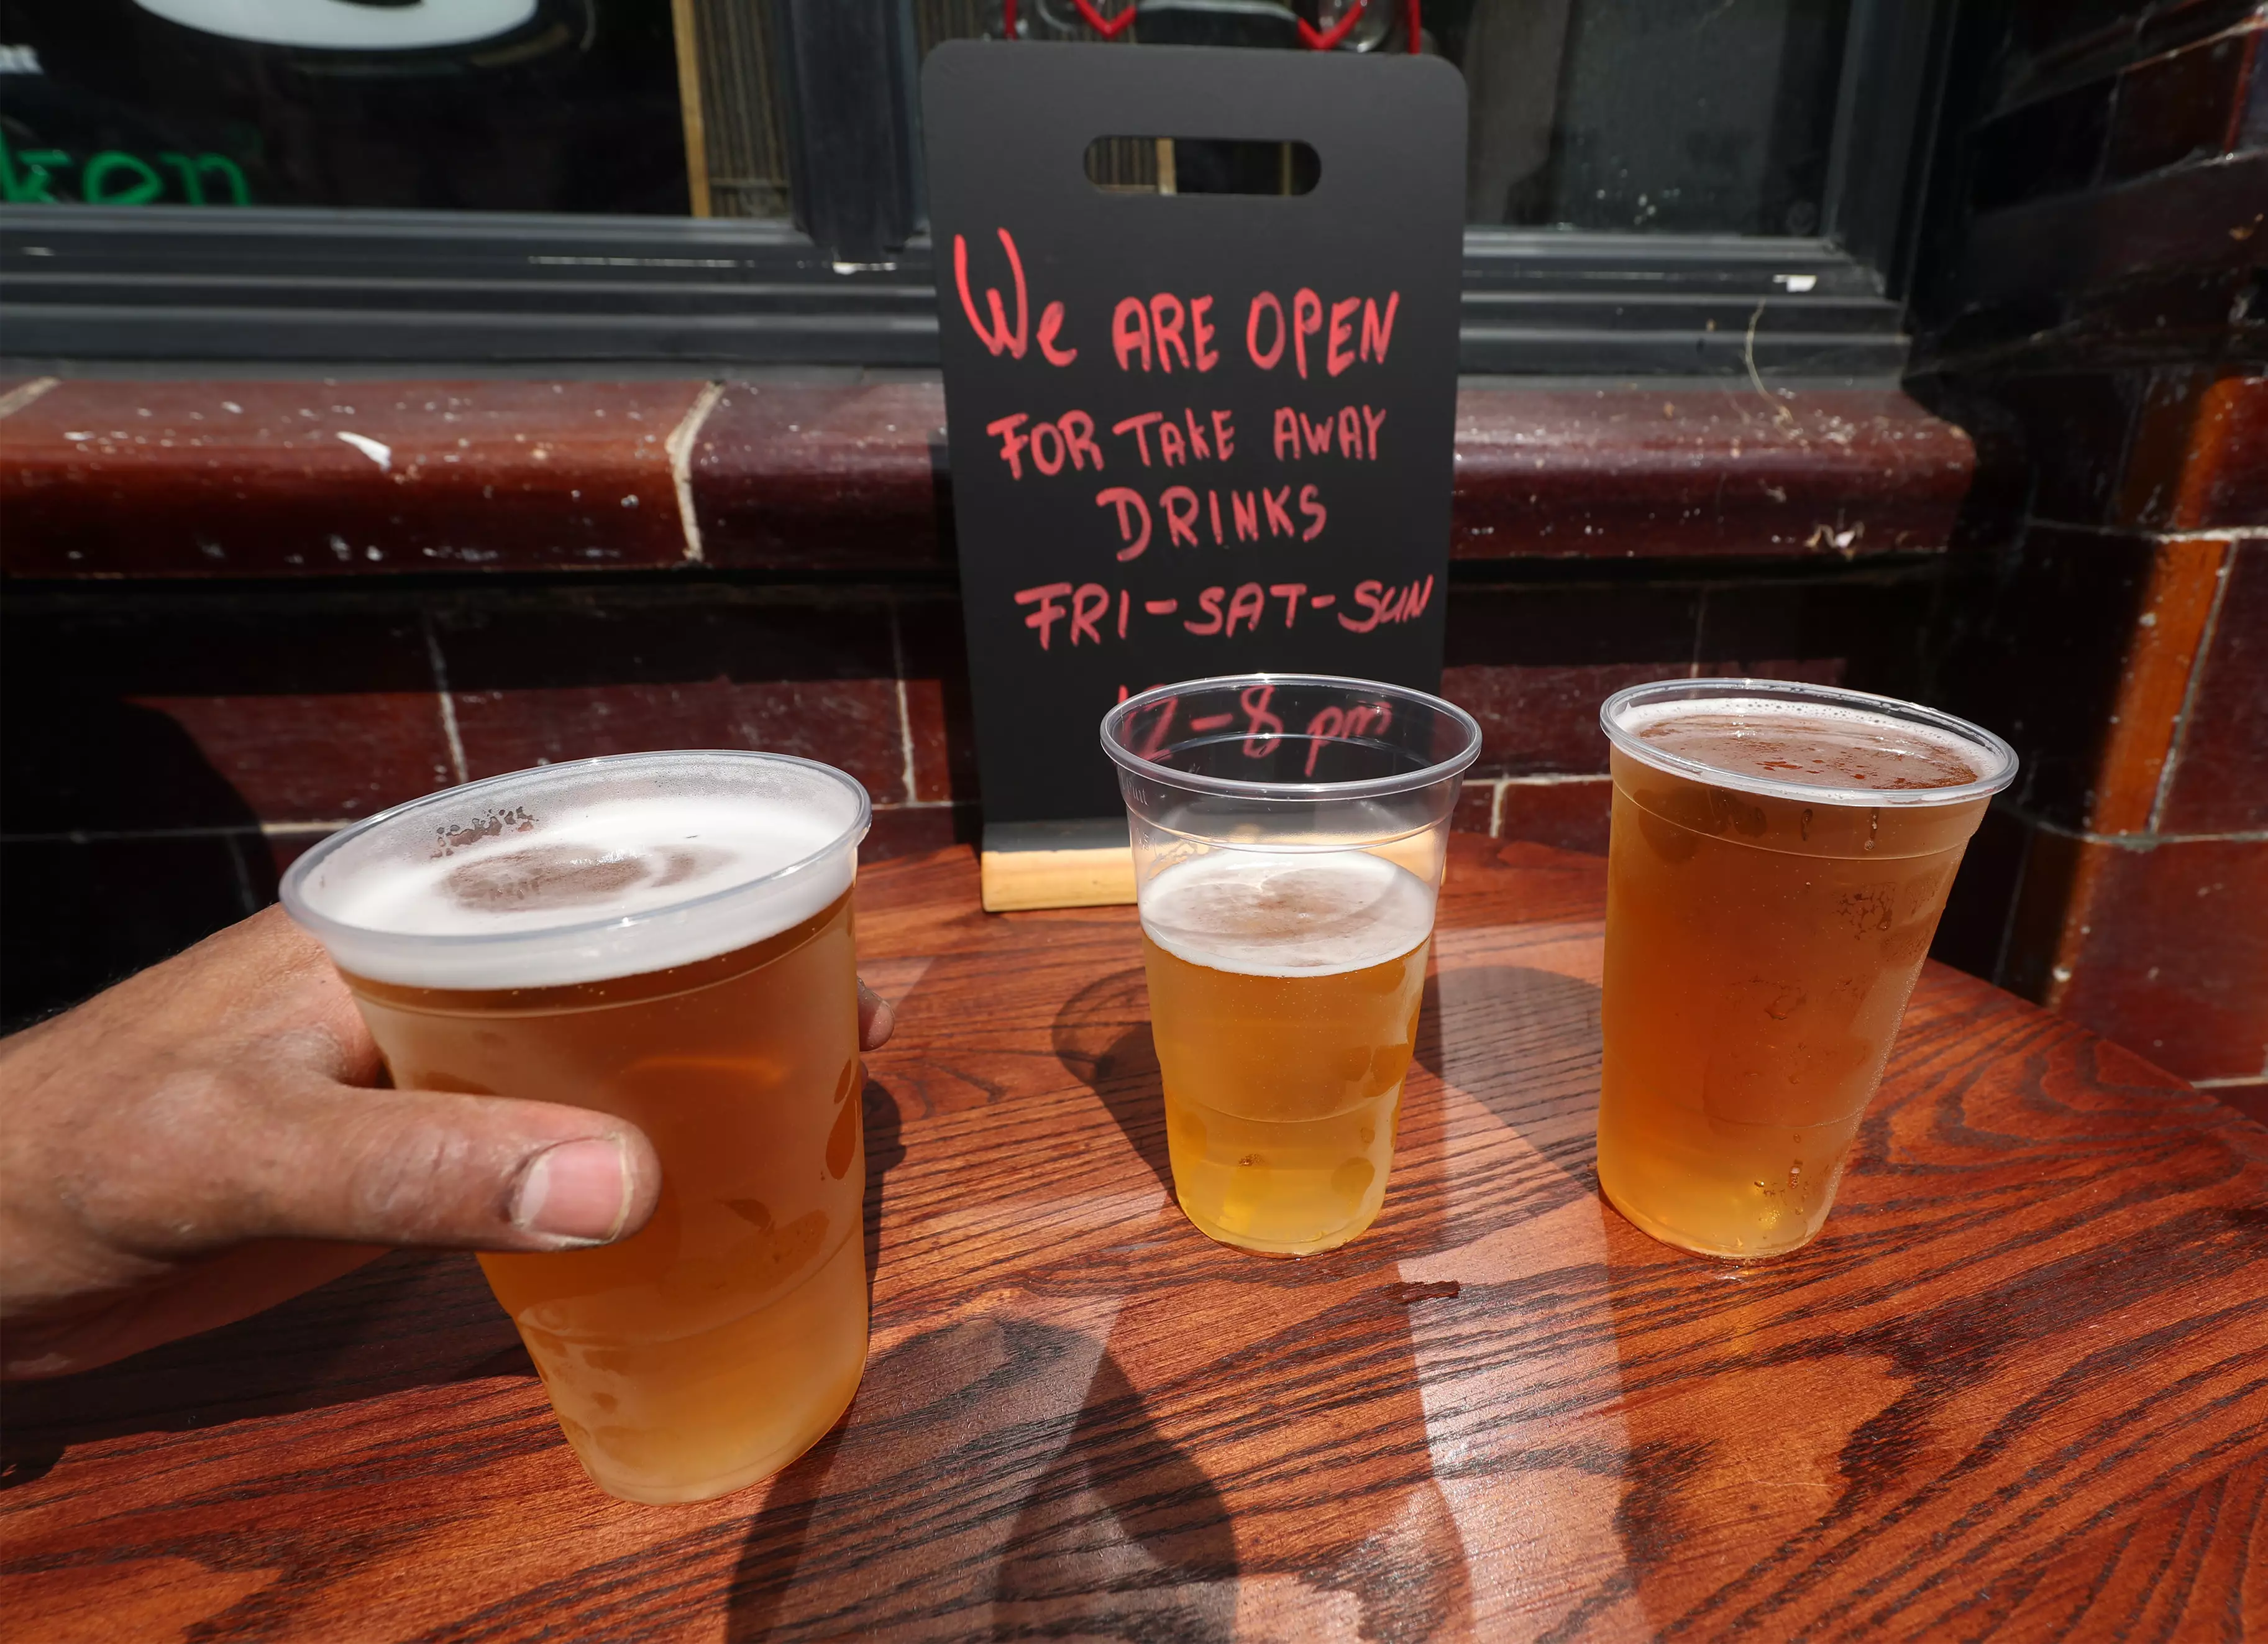 Pubs will now be able to sell takeaway pints during the November lockdown.